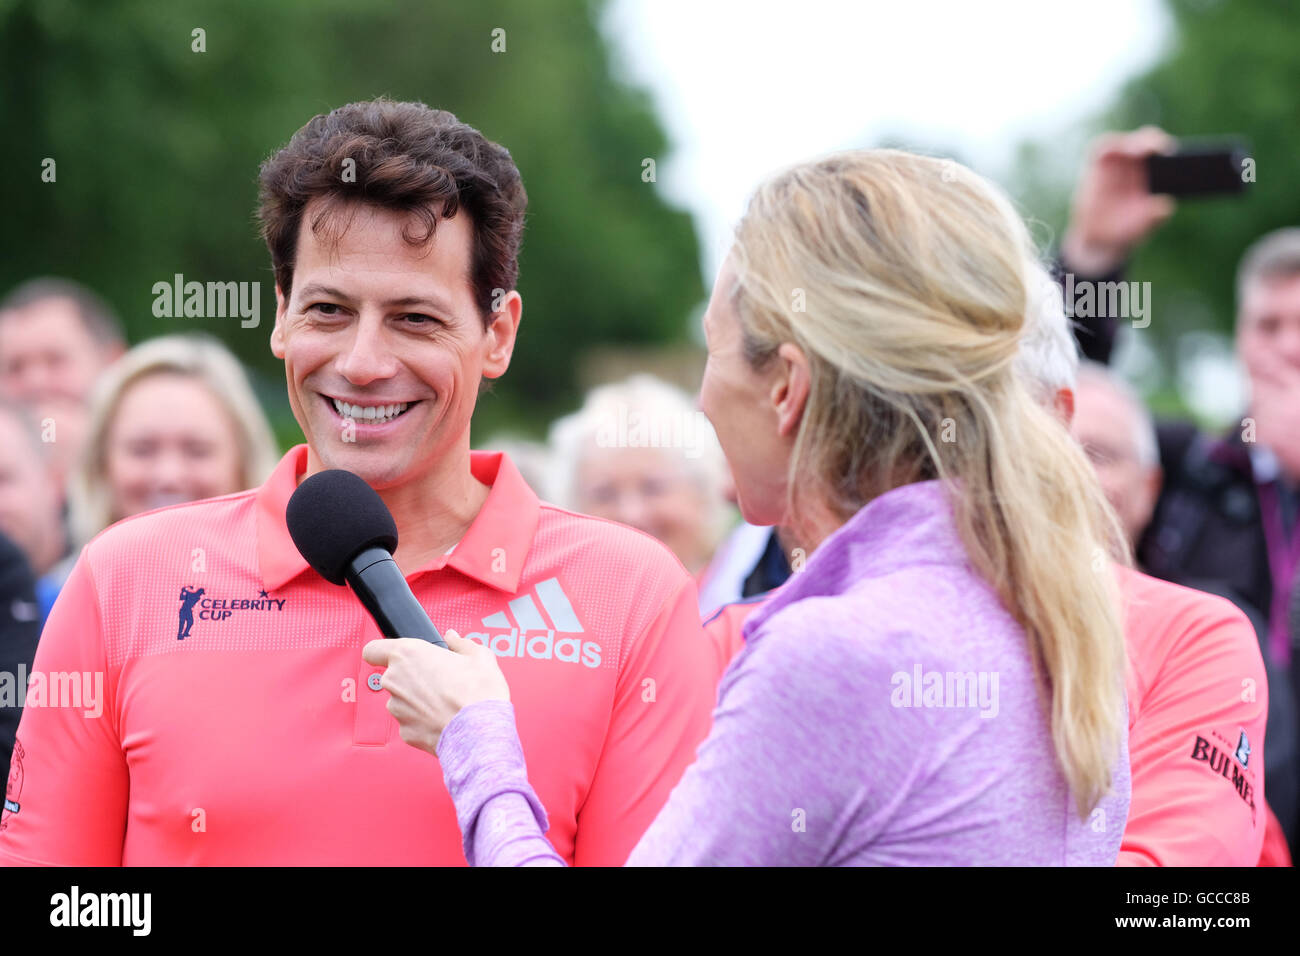 Celtic Manor, Newport, Wales - Saturday 9th July 2016 - The Celebrity Cup golf competition actor Ioan Gruffudd talks with host Di Dougherty. Photograph Steven May / Alamy Live News Stock Photo